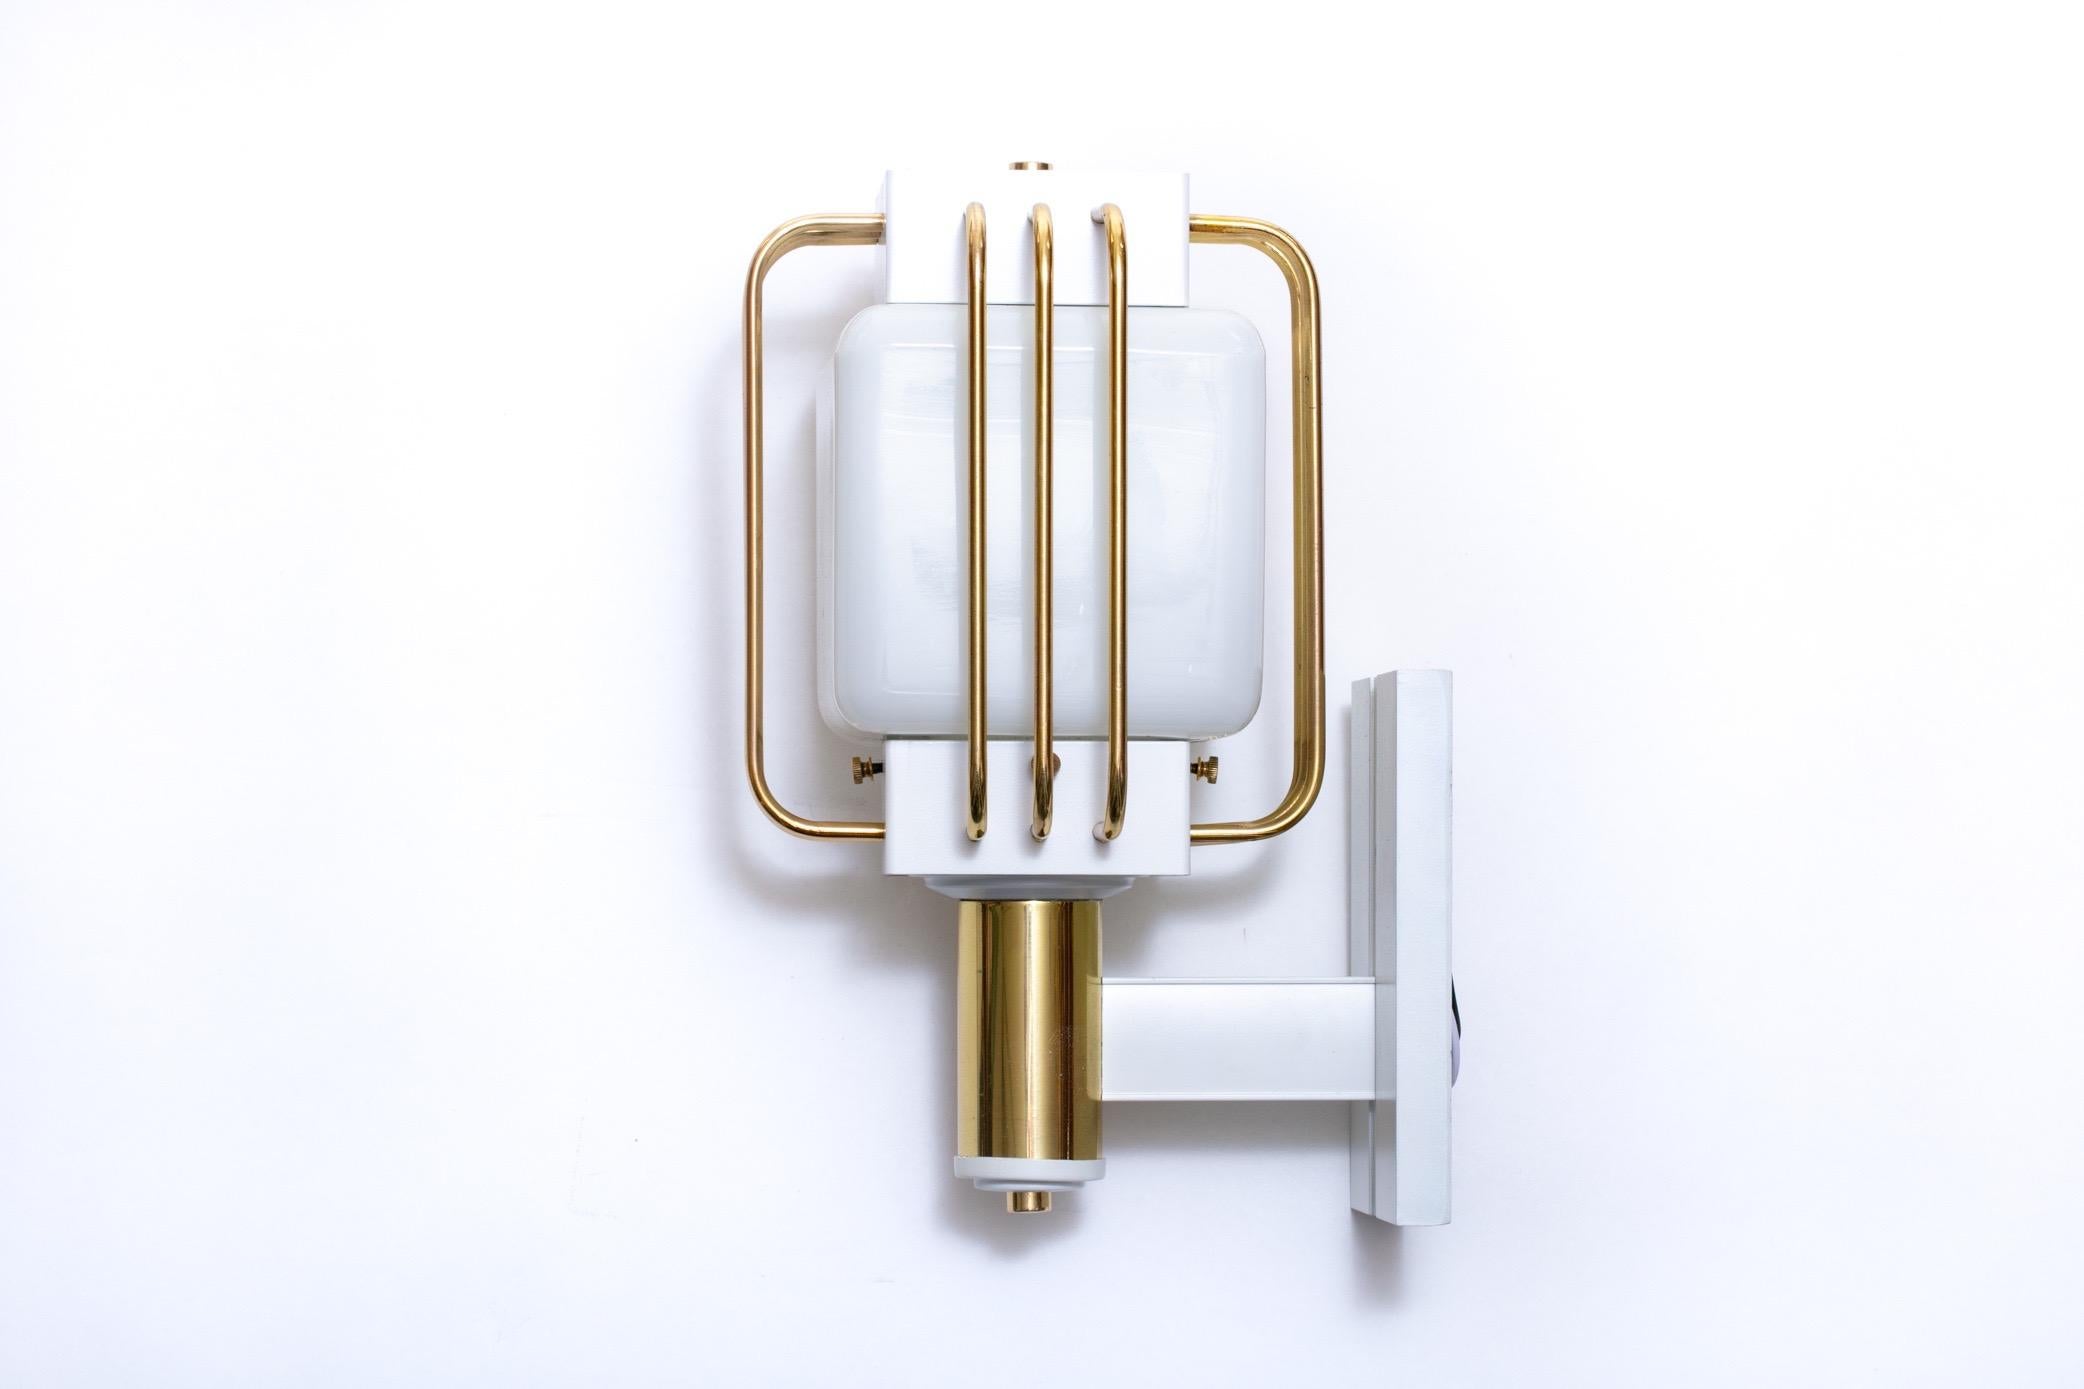 American Art Deco Outdoor Pair of Sconces in White Enamel and Brass